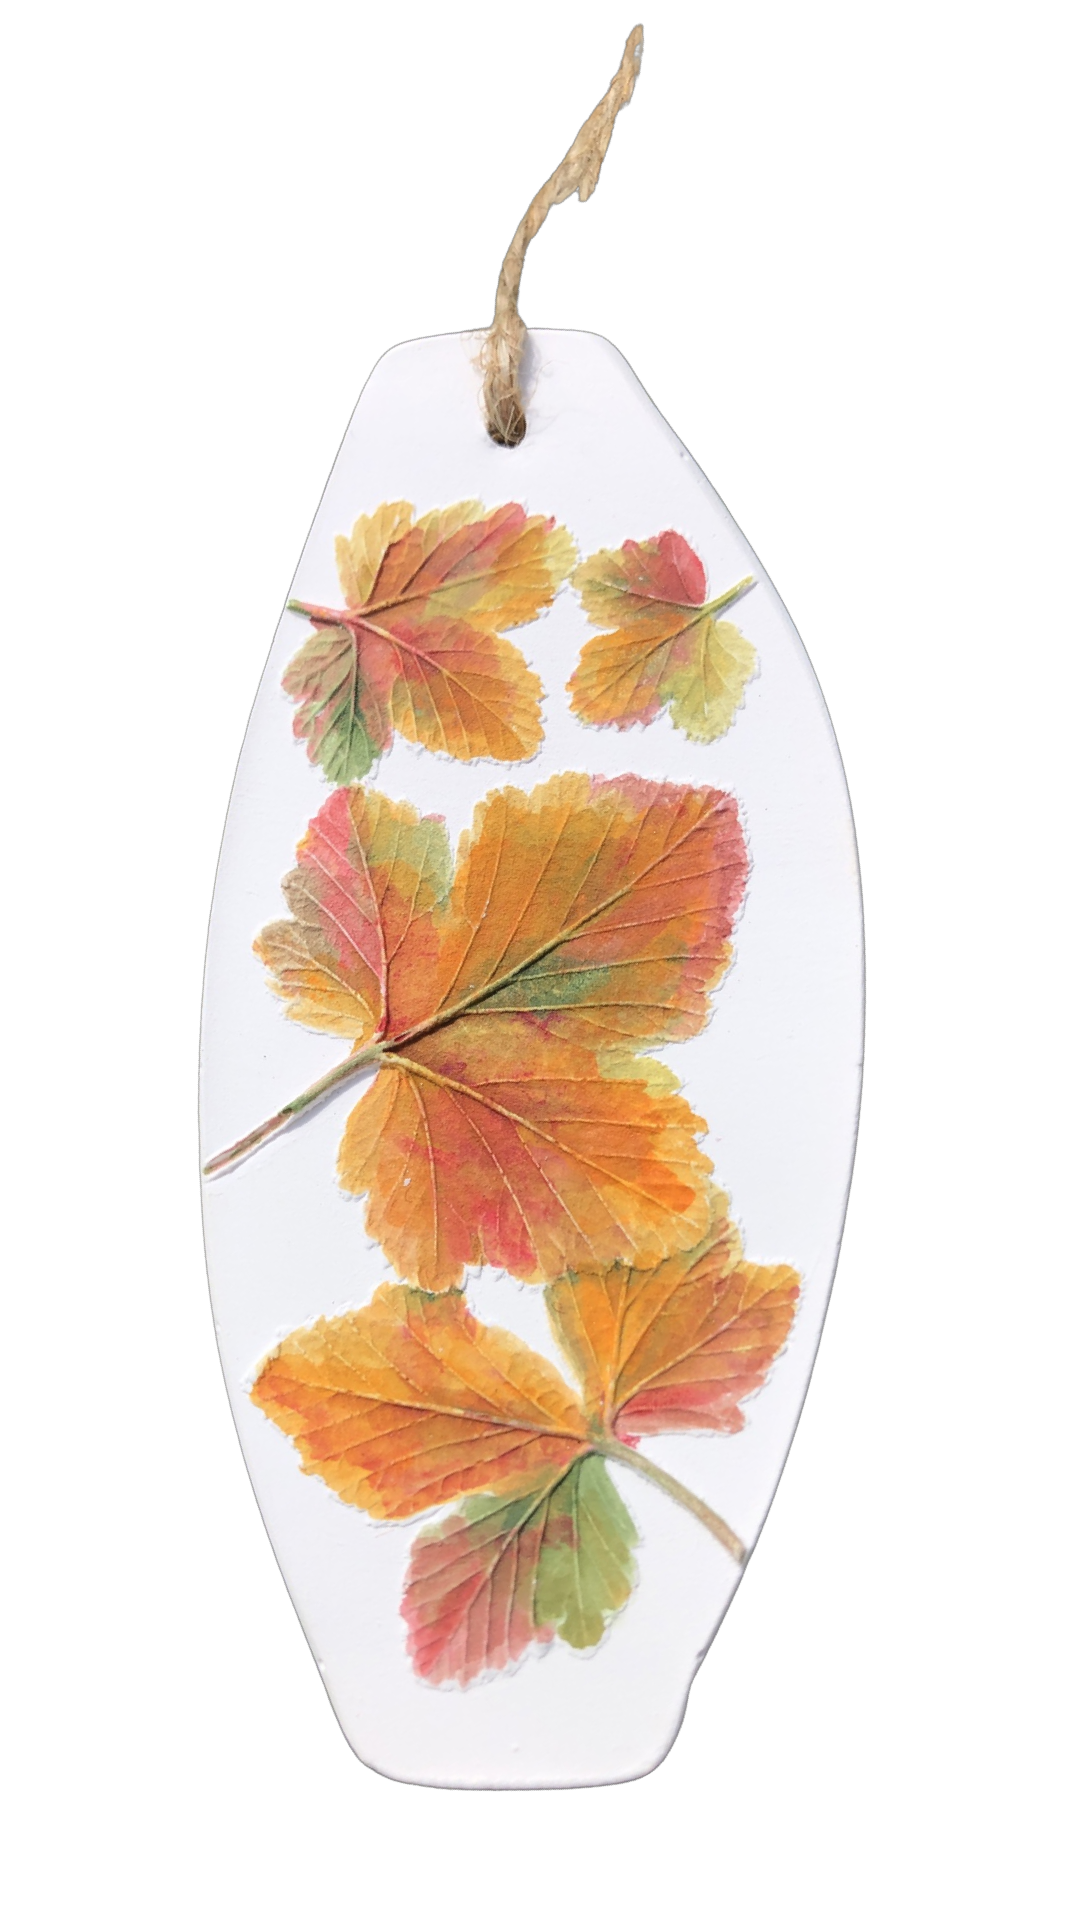 Botanical cast fragrance diffuser painted with autumn leaves